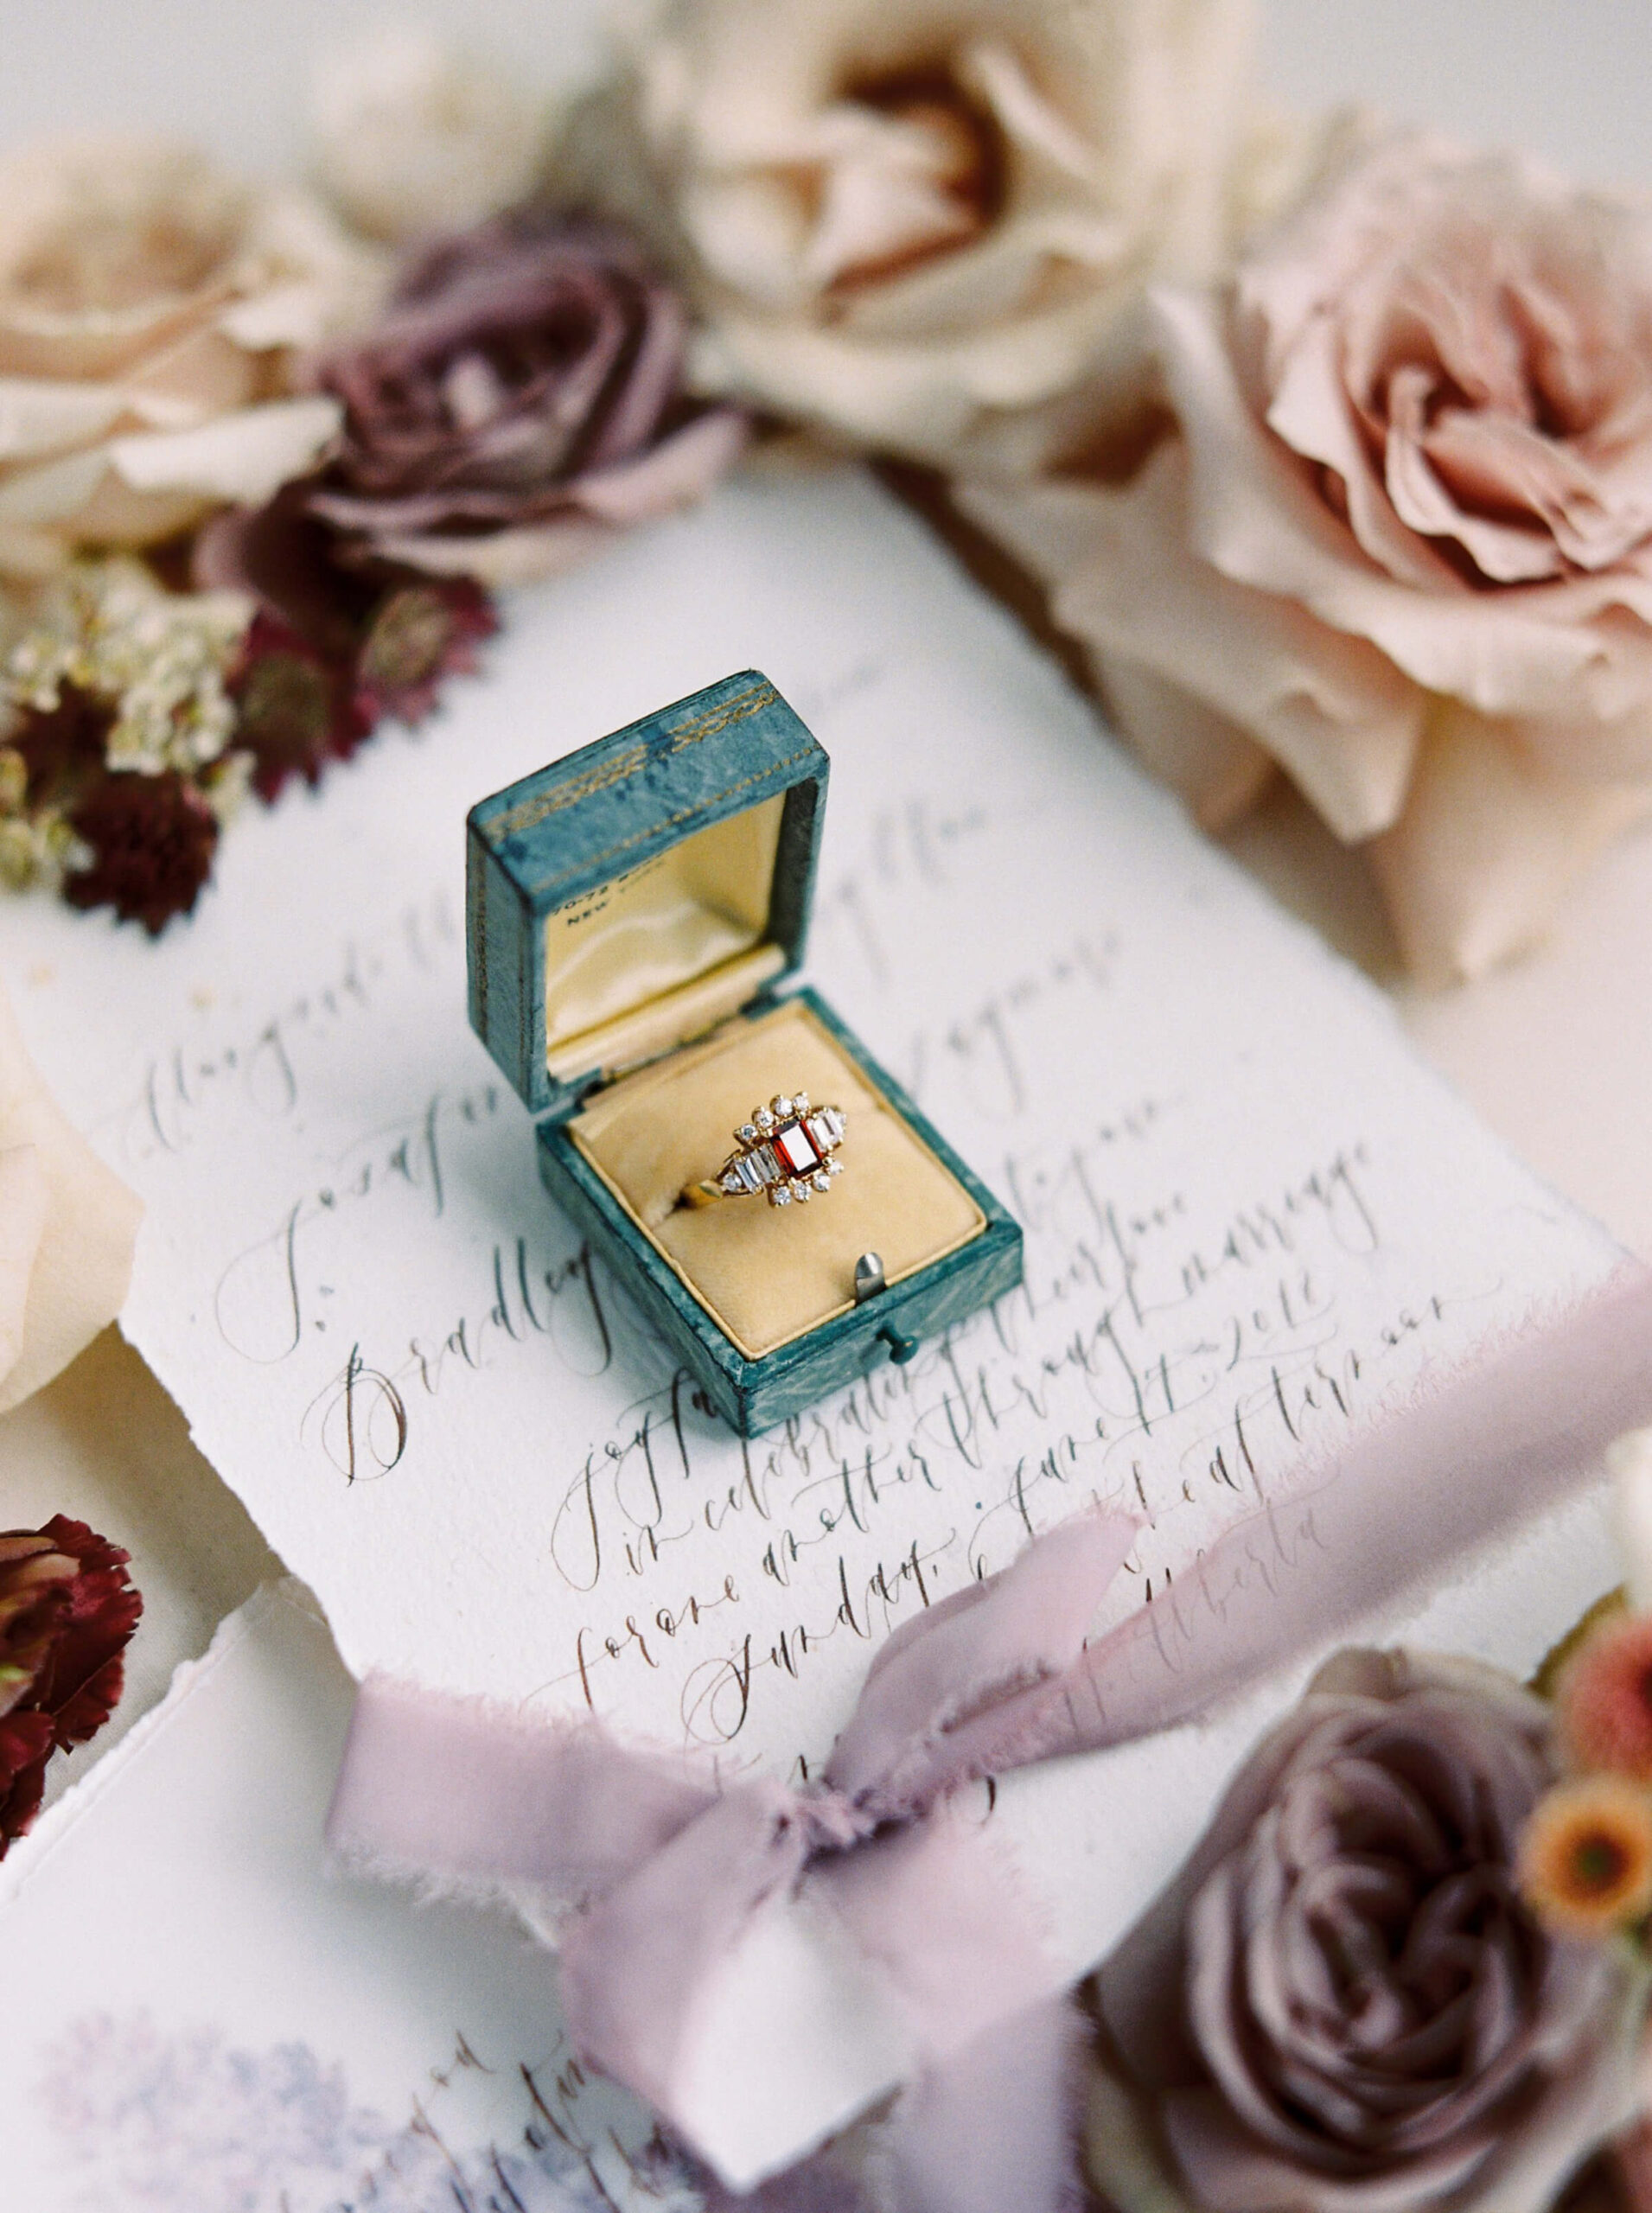 Why Wedding Details are So Important - A teal ring box sitting on top of a hand written invitation wrapped with silk ribbon and surrounded by soft pink roses